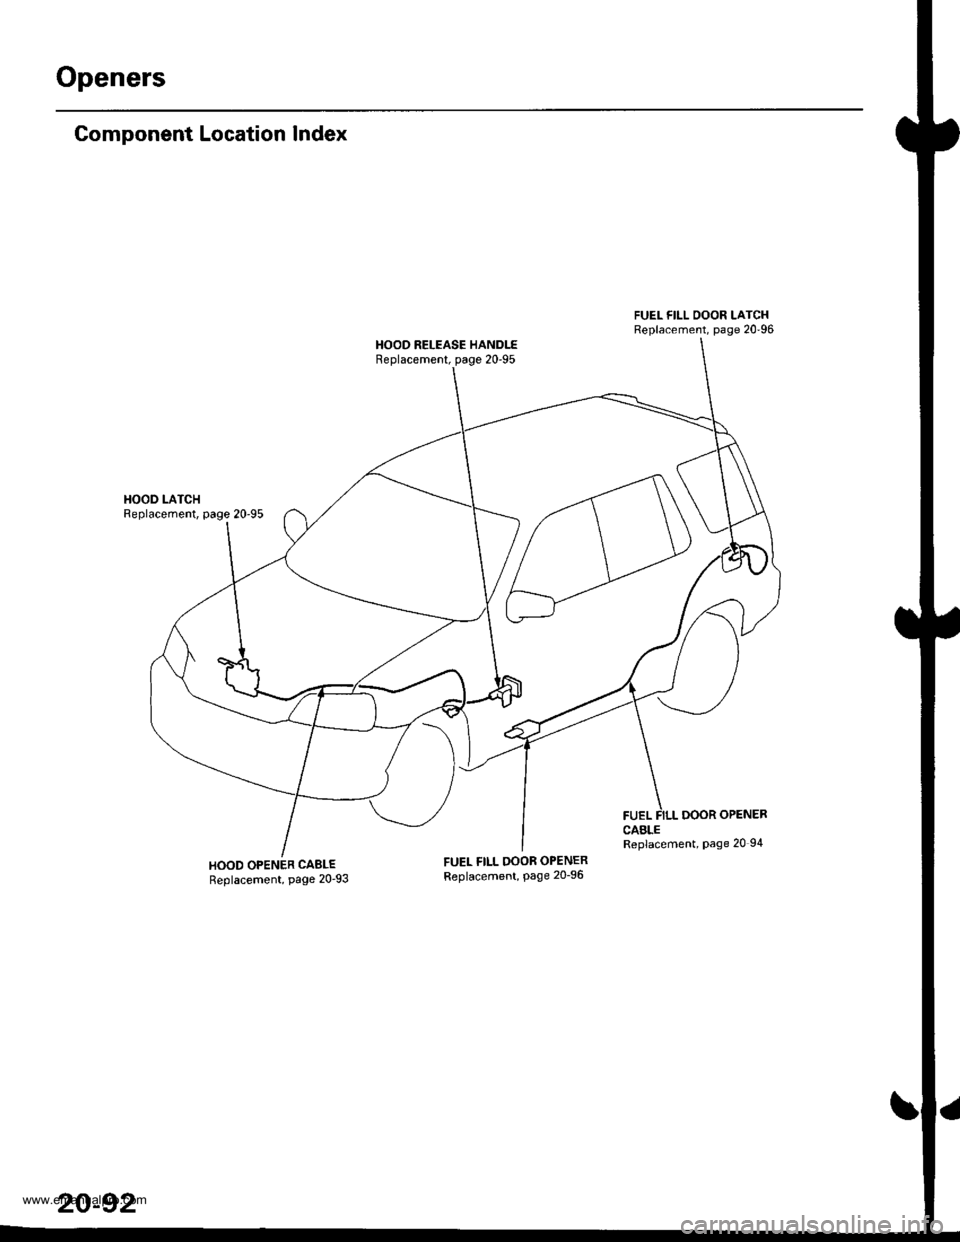 HONDA CR-V 1998 RD1-RD3 / 1.G Workshop Manual 
Openers
Component Location Index
HOOD LATCHReplacement, page 2095
HOOD OPENER CABLEReplacement, page 2093
FUEL FILL OOOR LATCHReplacement, page 2096
HOOD RELEASE HANDLEReplacement, page 2095
FUEL